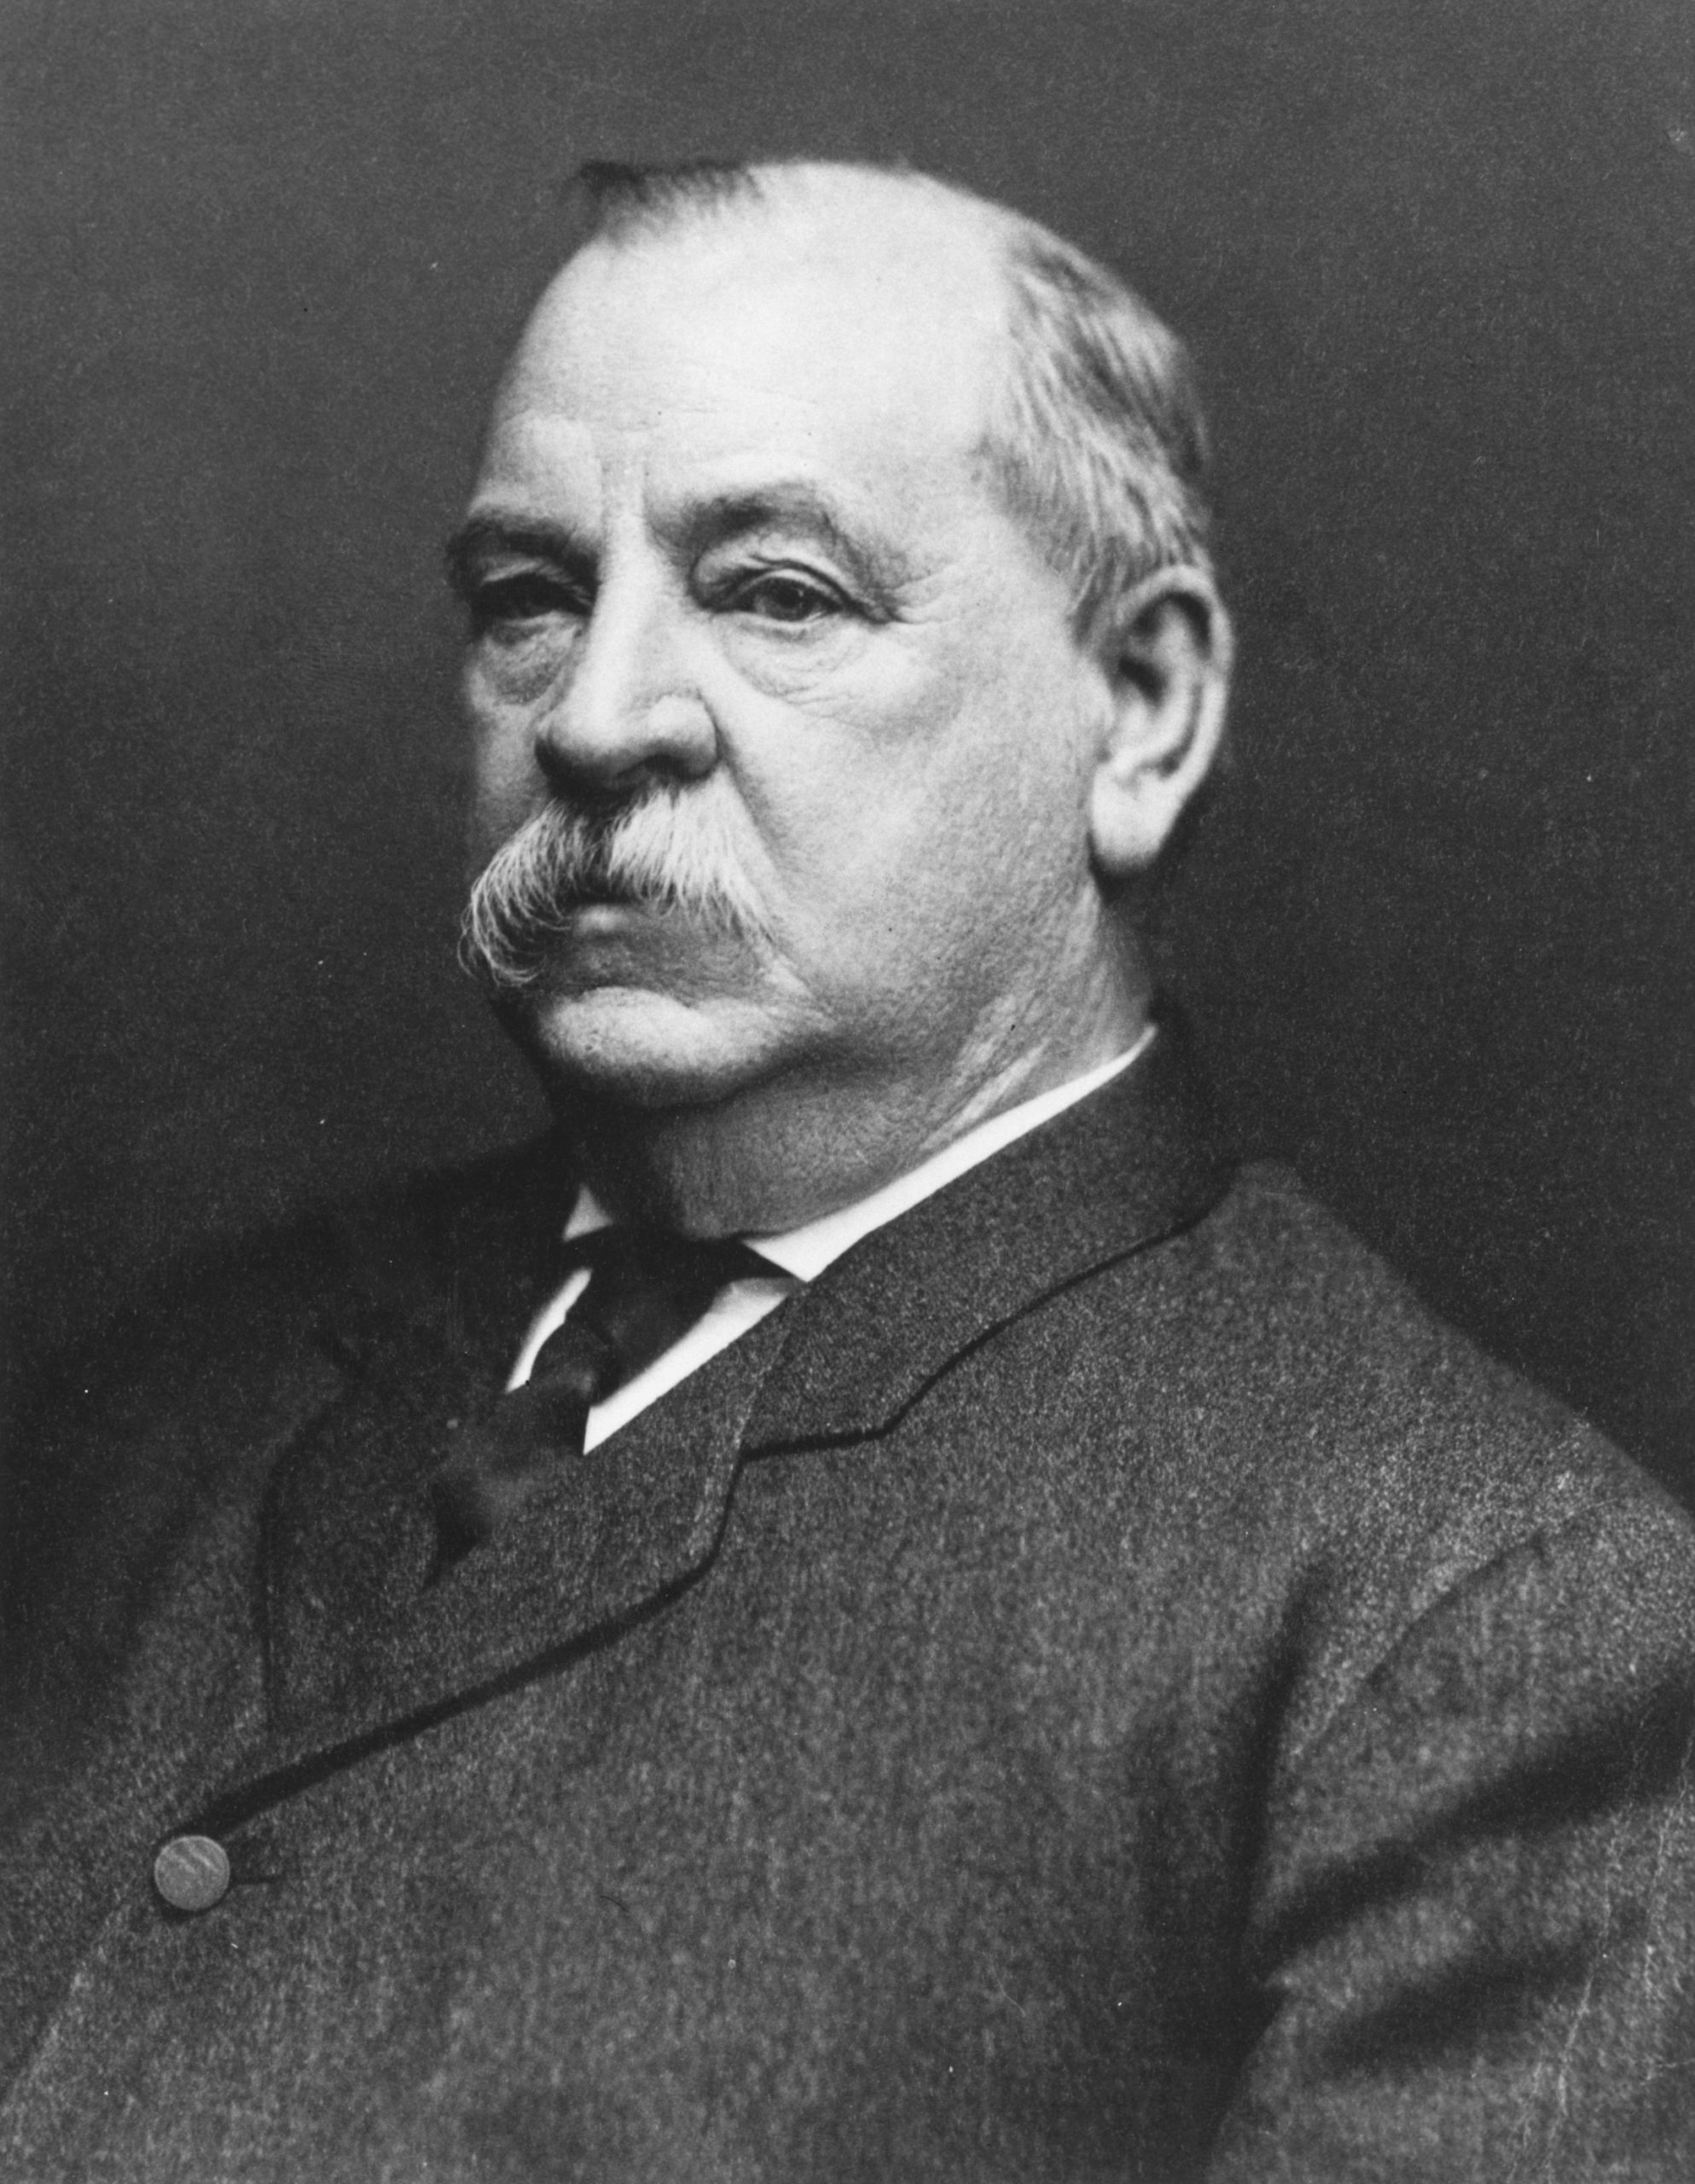 Grover Cleveland and the South, Part 2